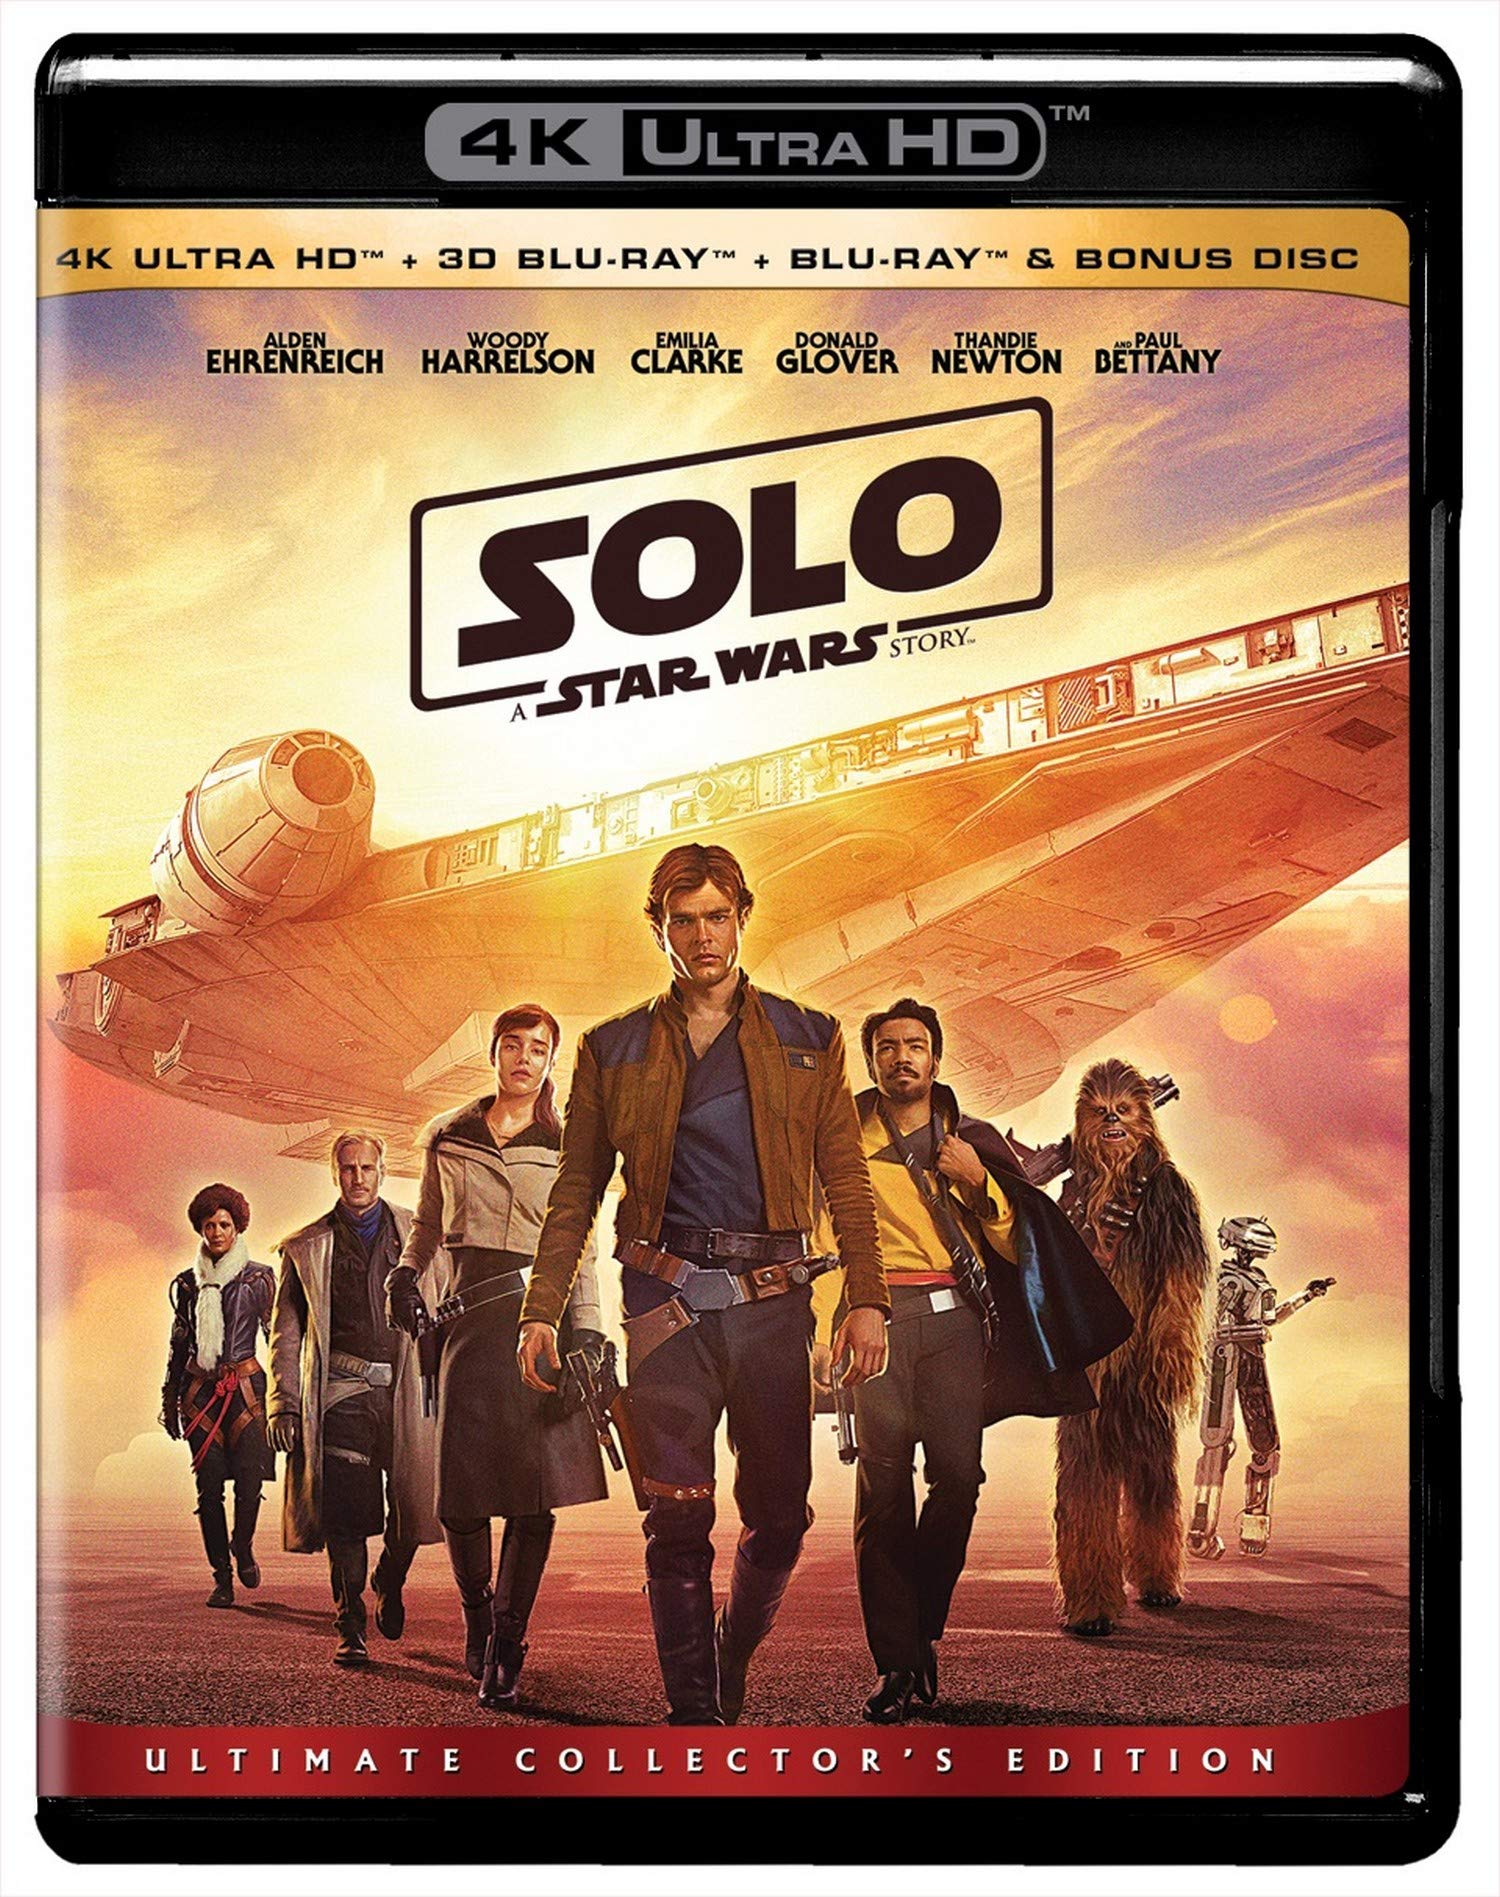 solo-a-star-wars-story-uhd-4k-3d-bd-bd-movie-purchase-or-watch